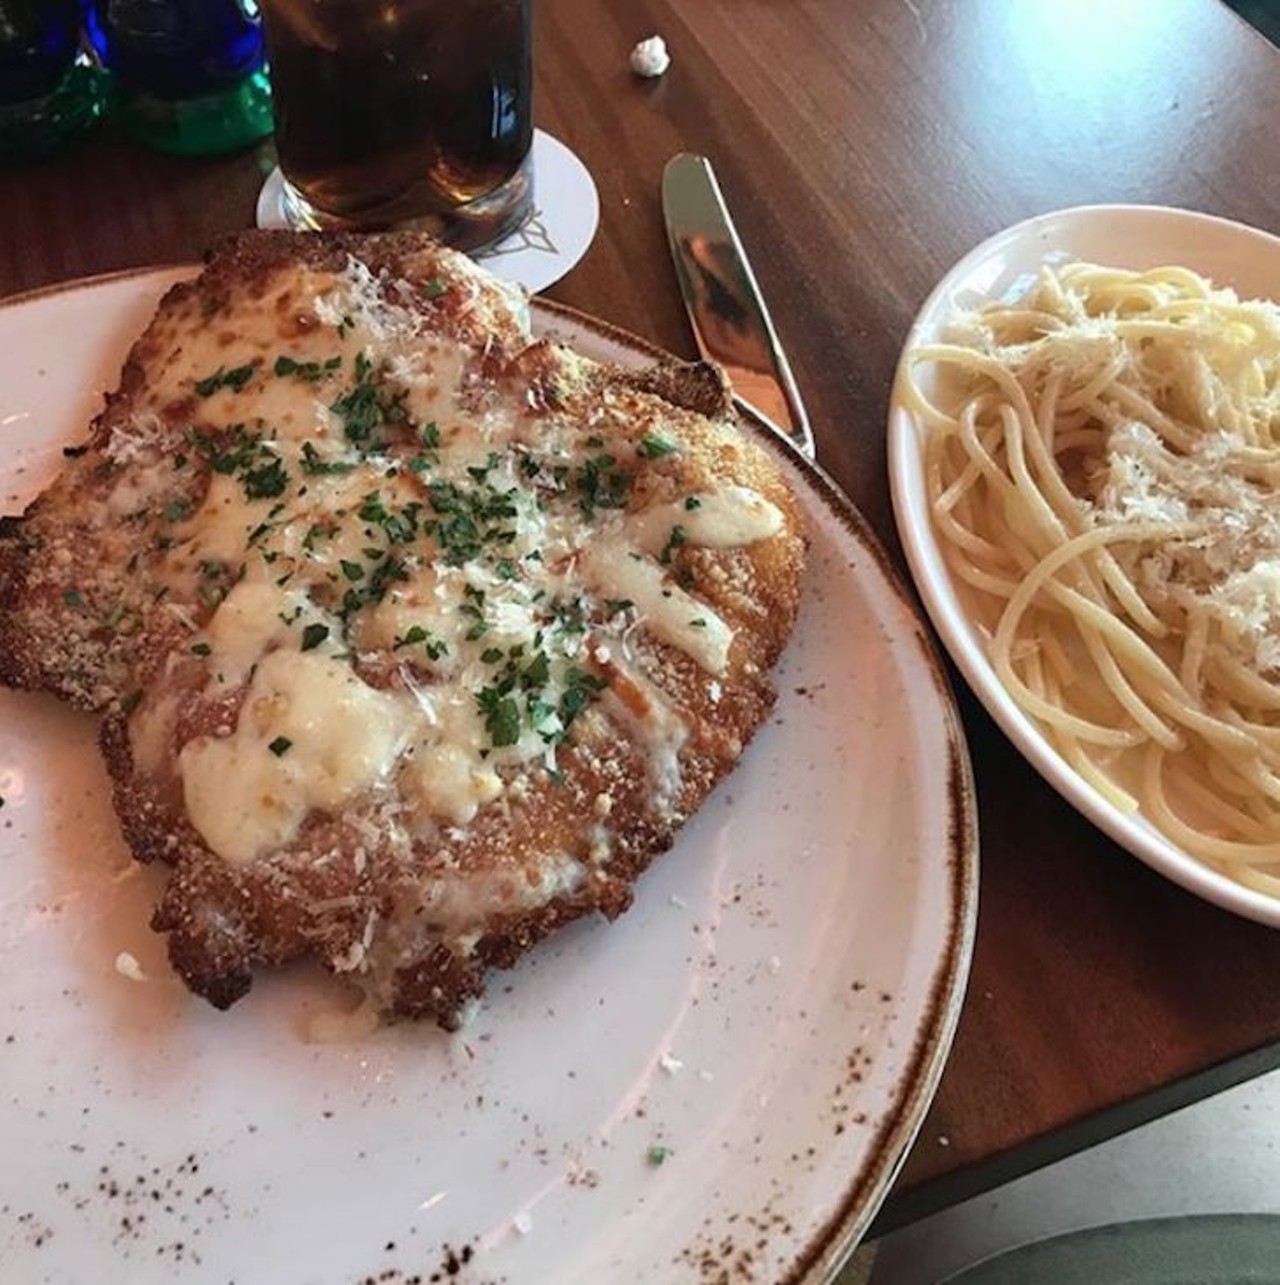 Try the chicken parm, a classic Italian dish.. 
Photo via just_a_small_town_g1rl_/Instagram